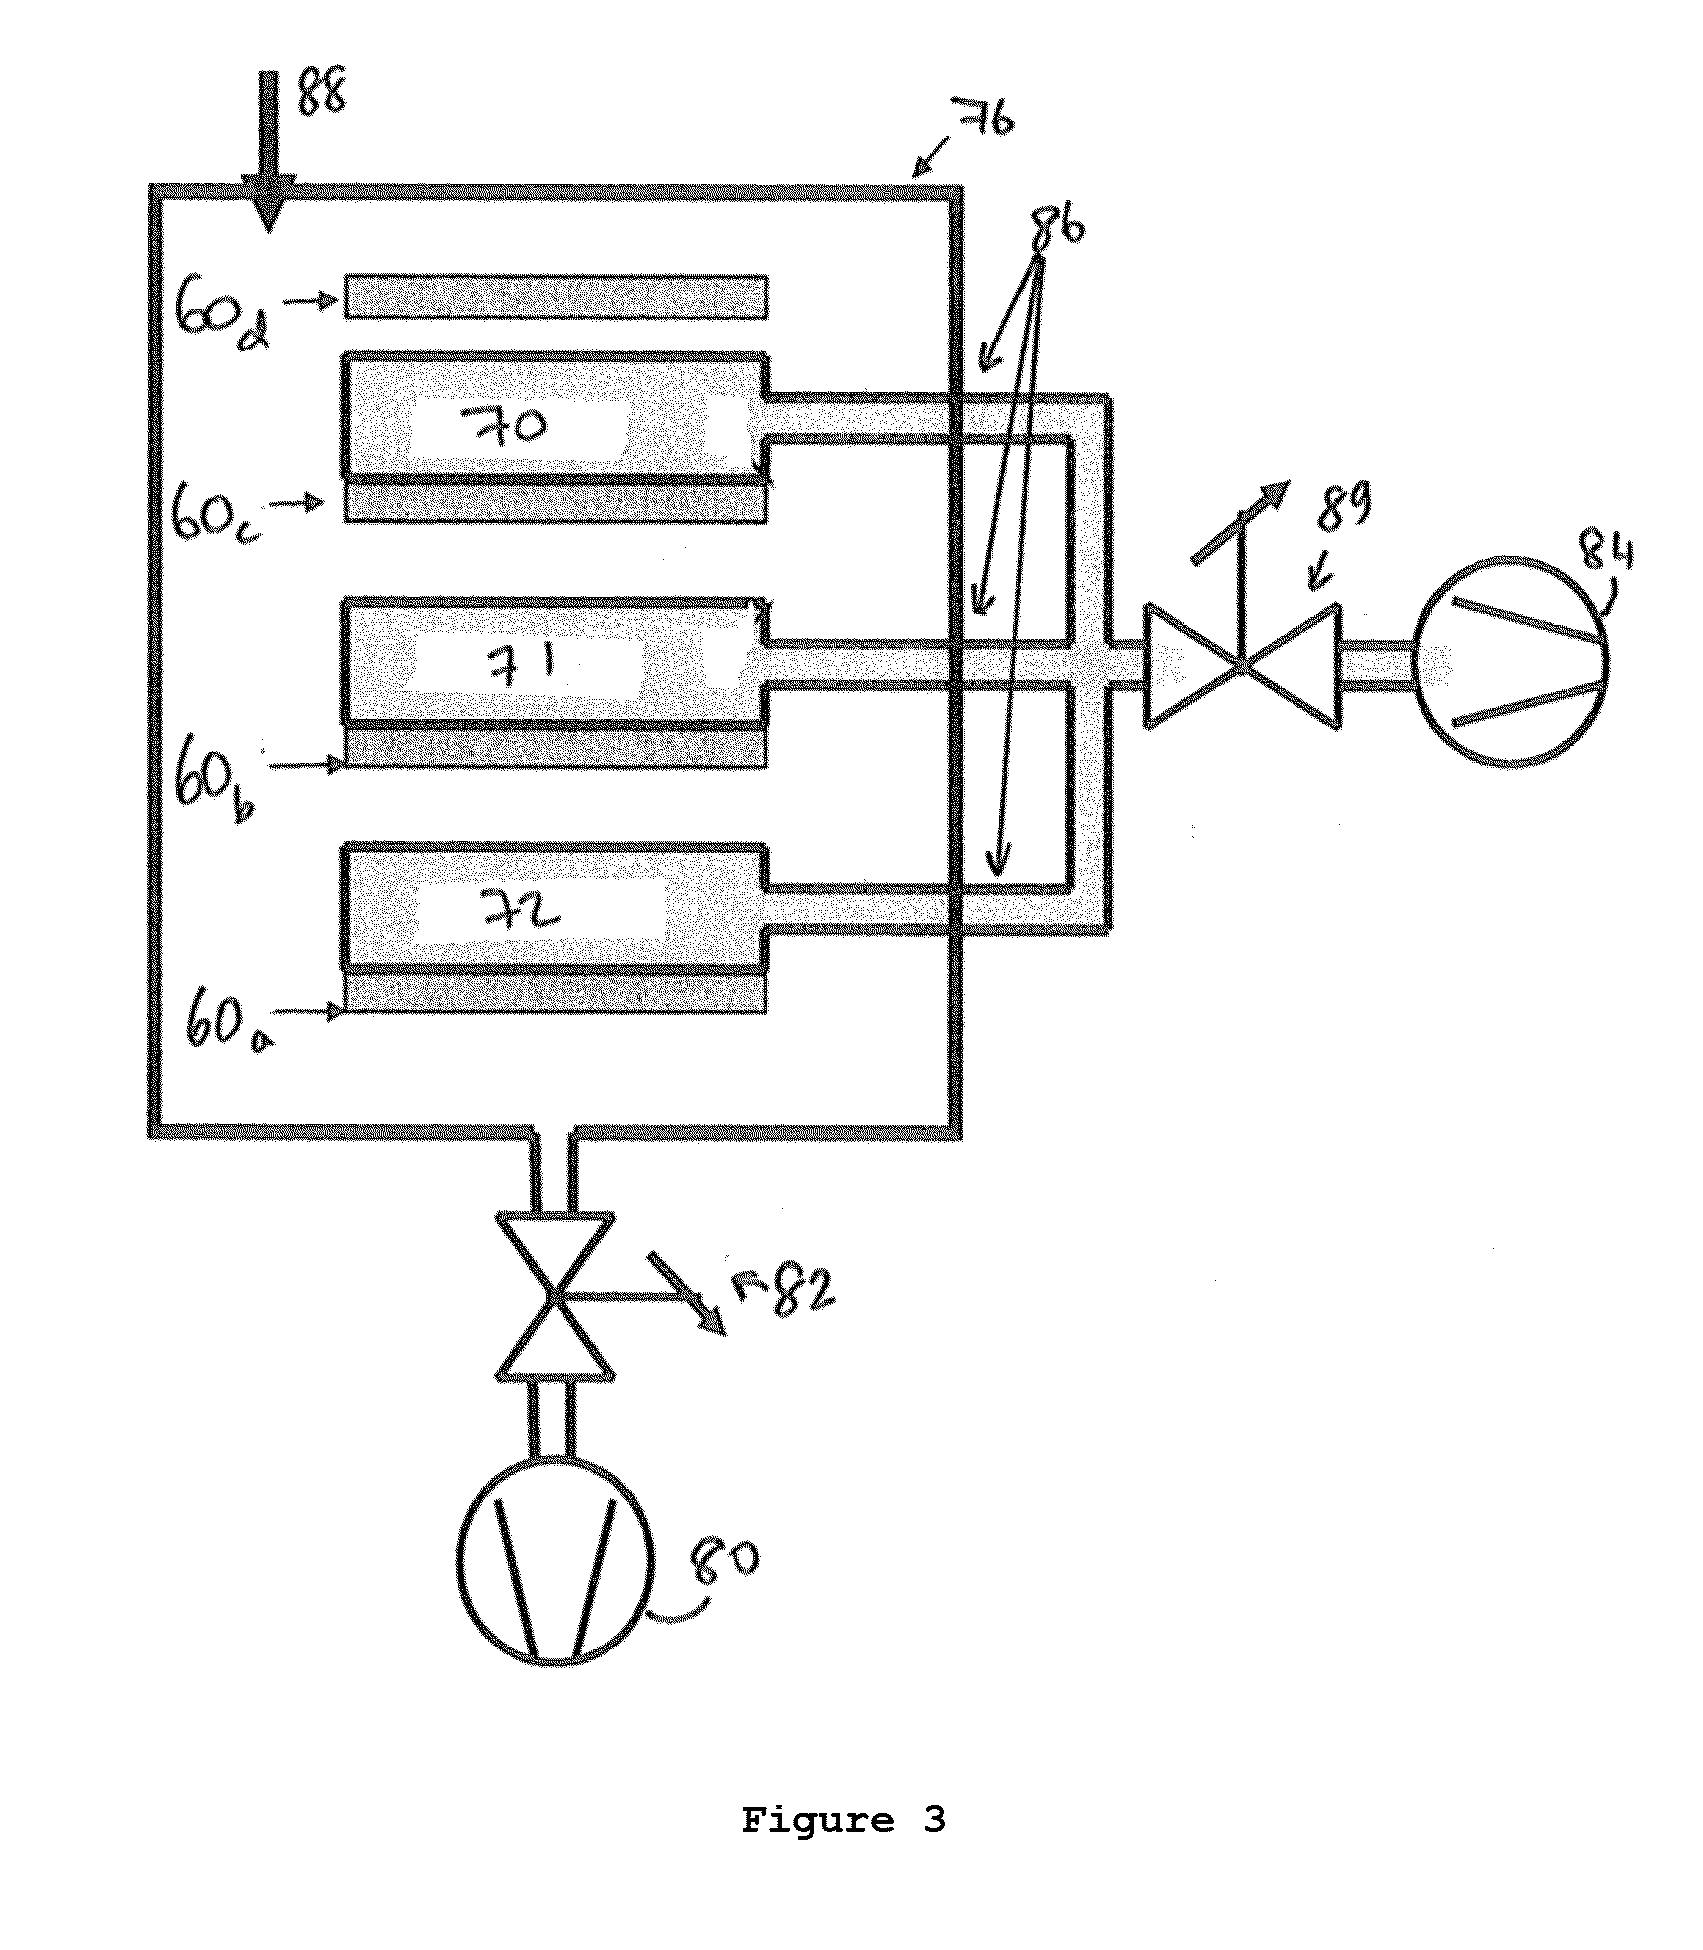 Heat transfer control in pecvd systems